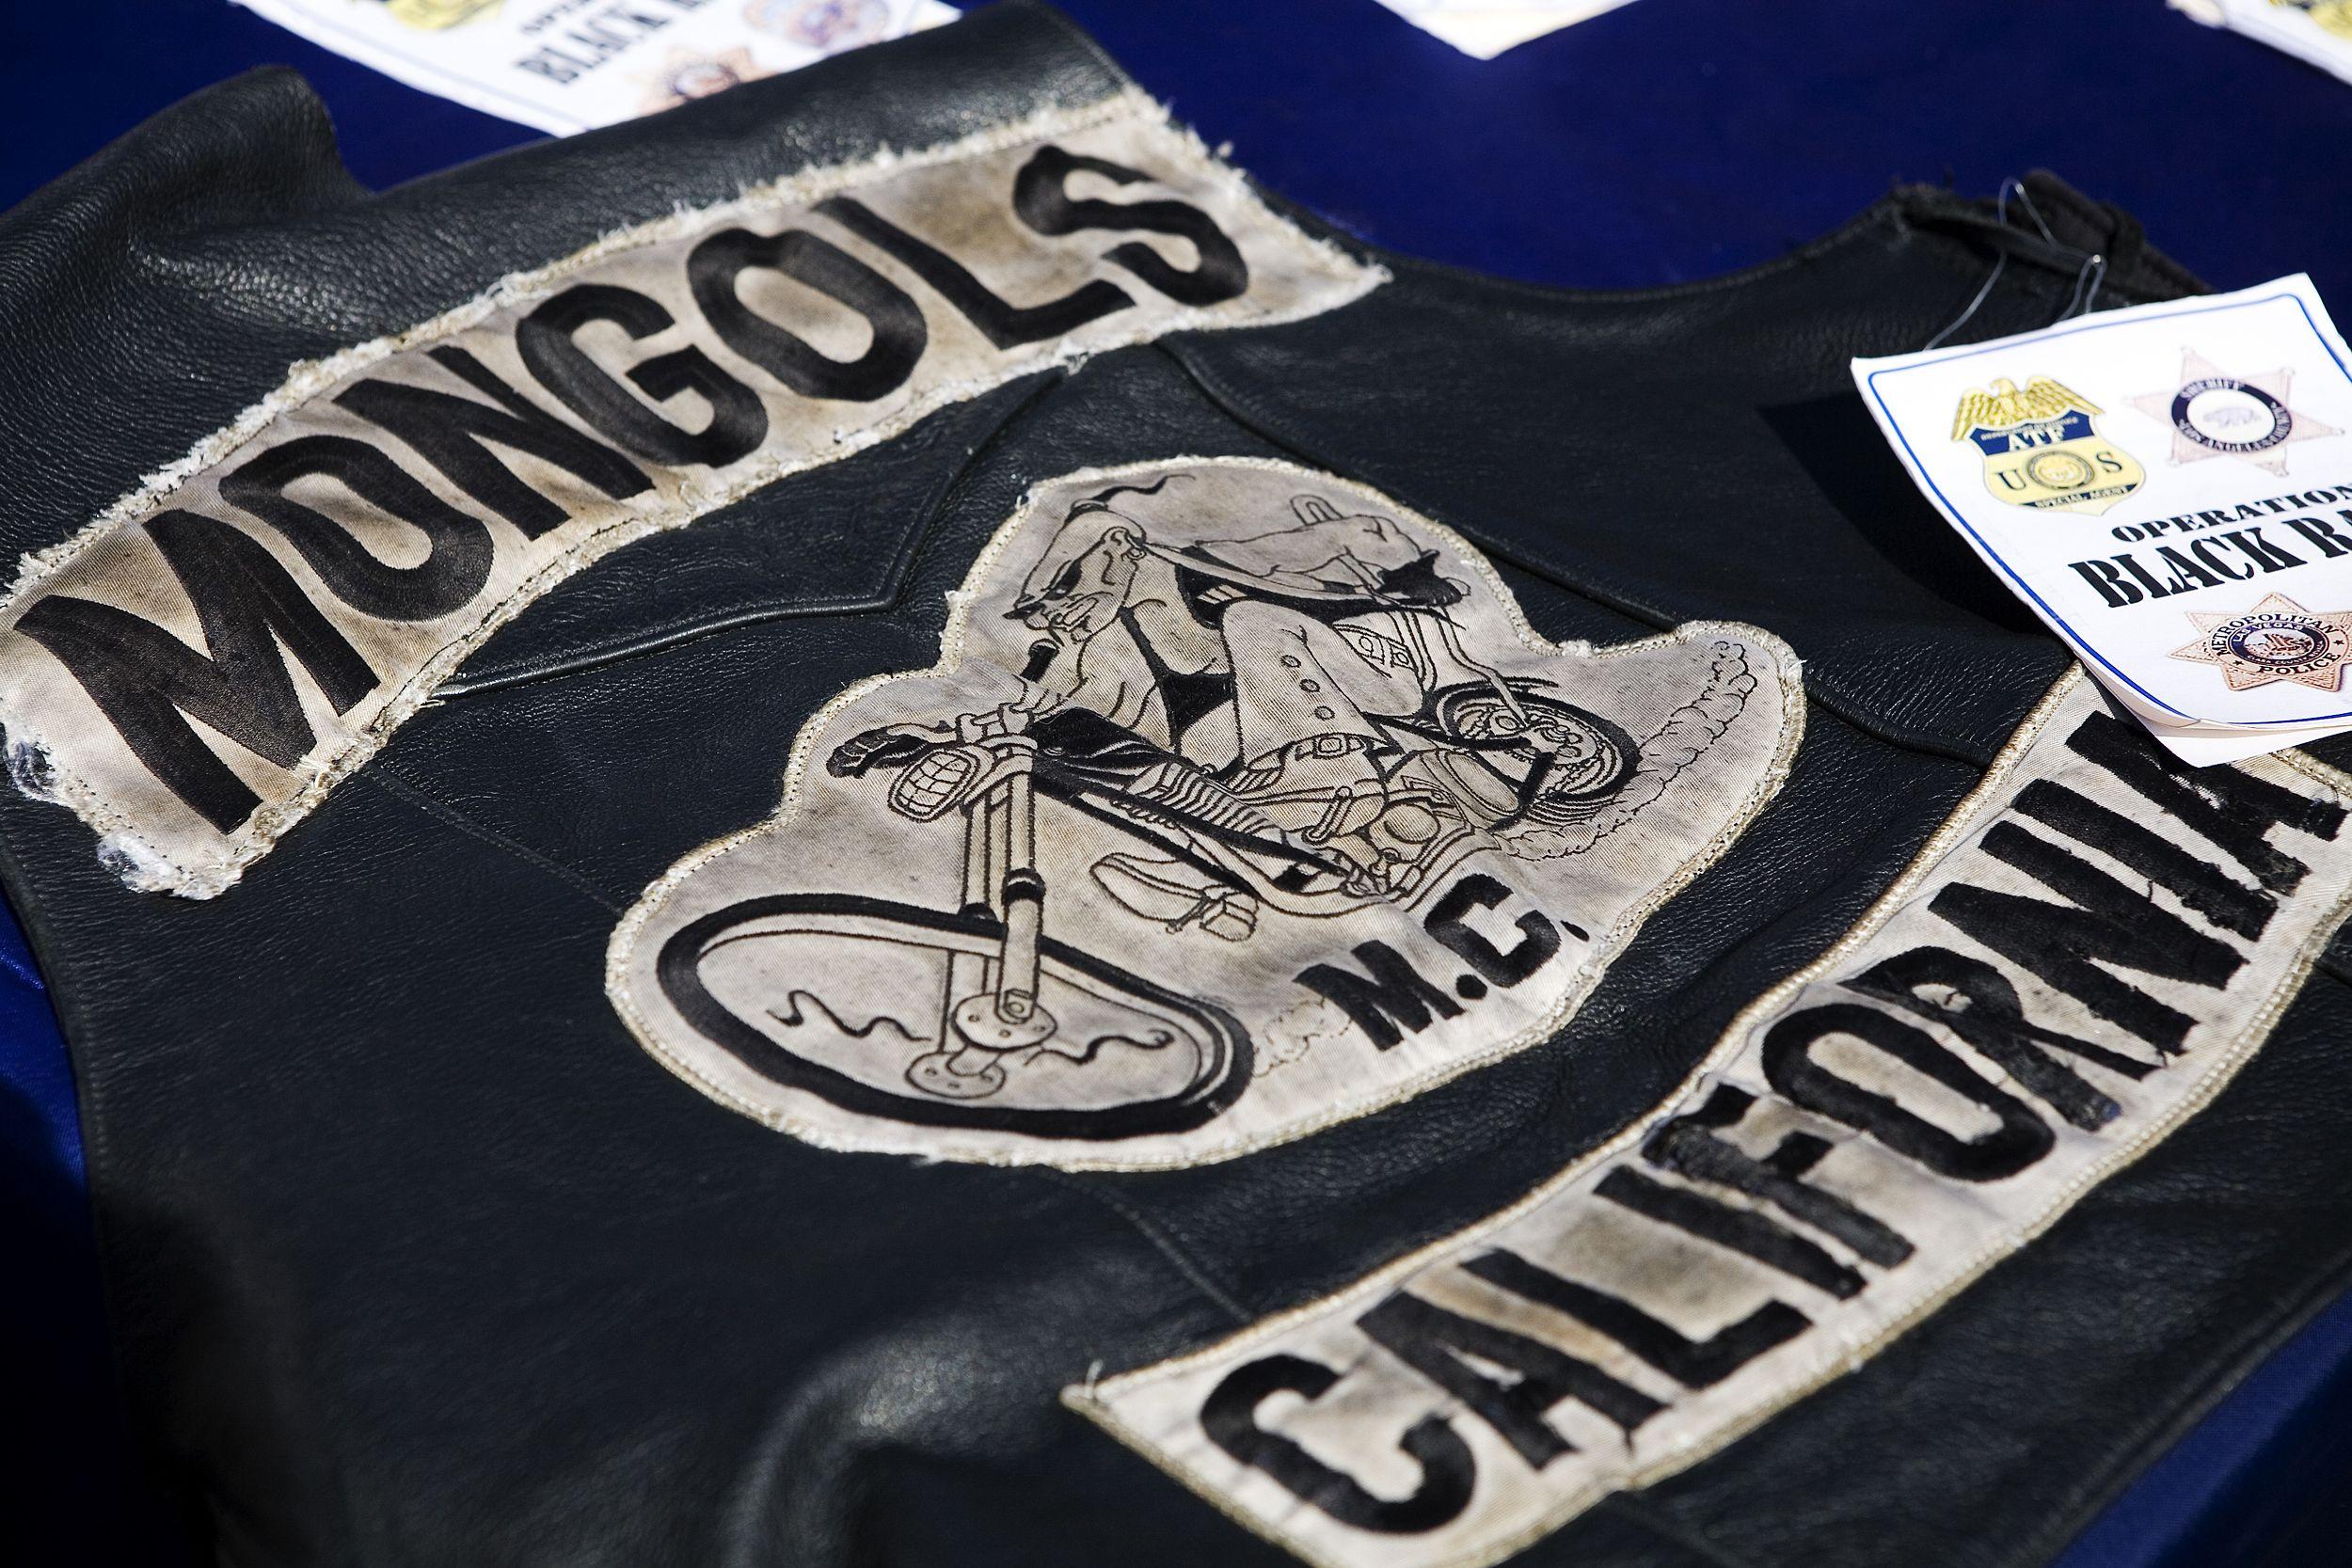 Mongols Logo - Judge fines Mongols motorcycle club $ but group retains